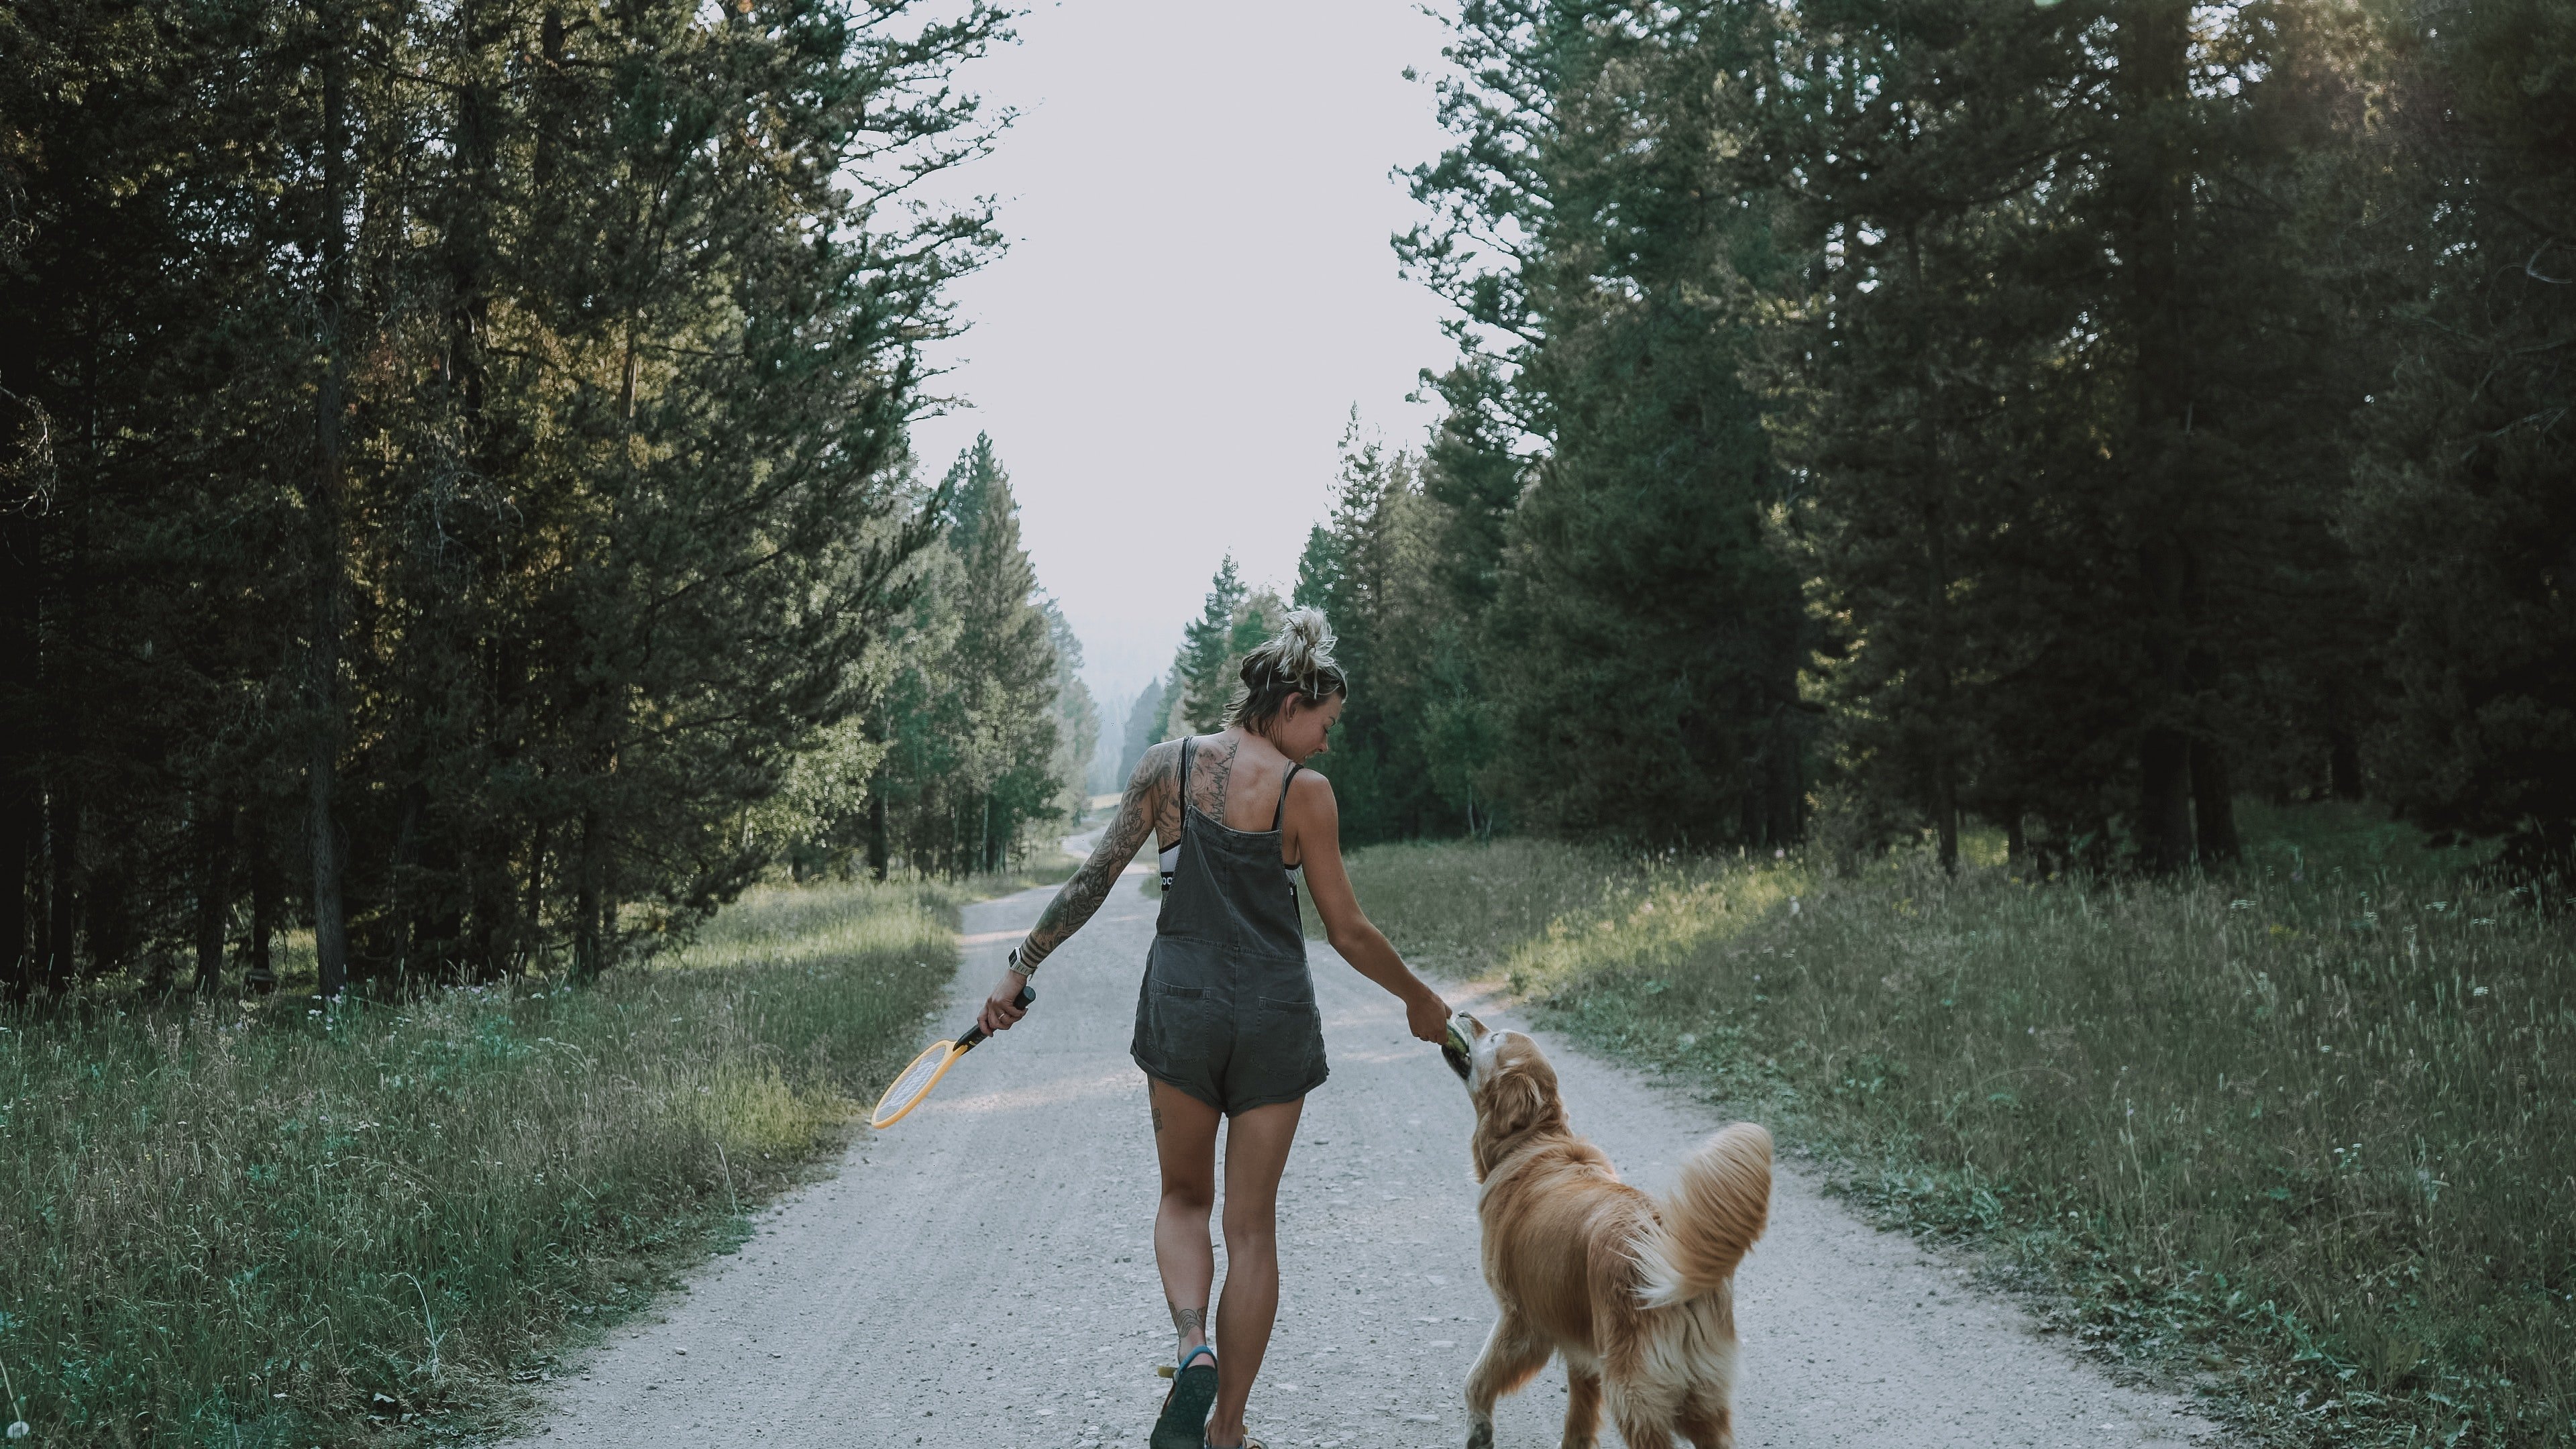 Seeing that her golden retriever had had a field day at the park, Annette headed home to rest. | Source: Pexels